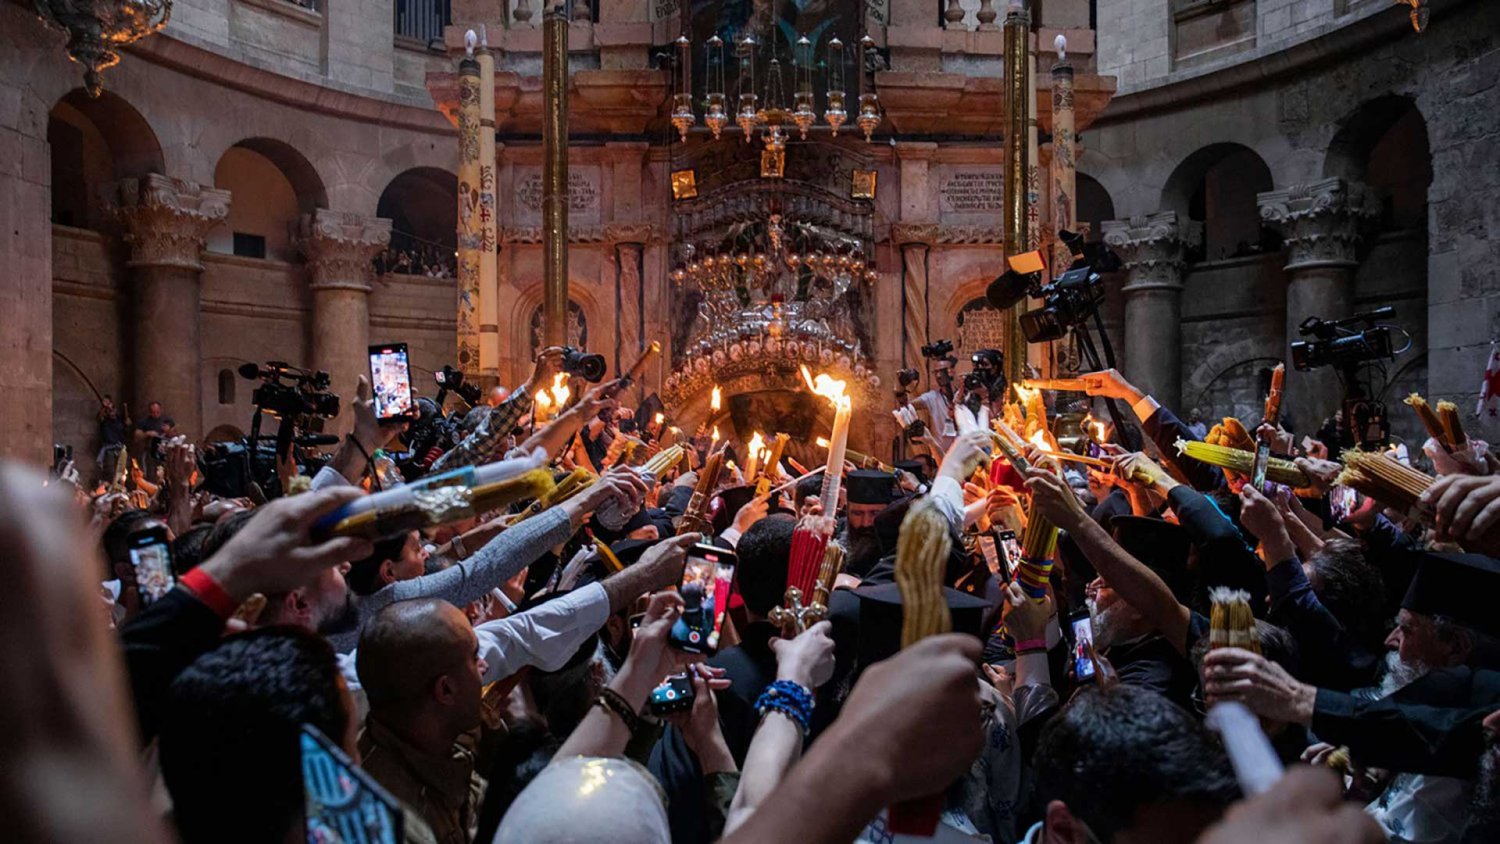 The Holy Fire ceremony at the Church of the Holy Sepulchre in Jerusalem, April 23, 2022.